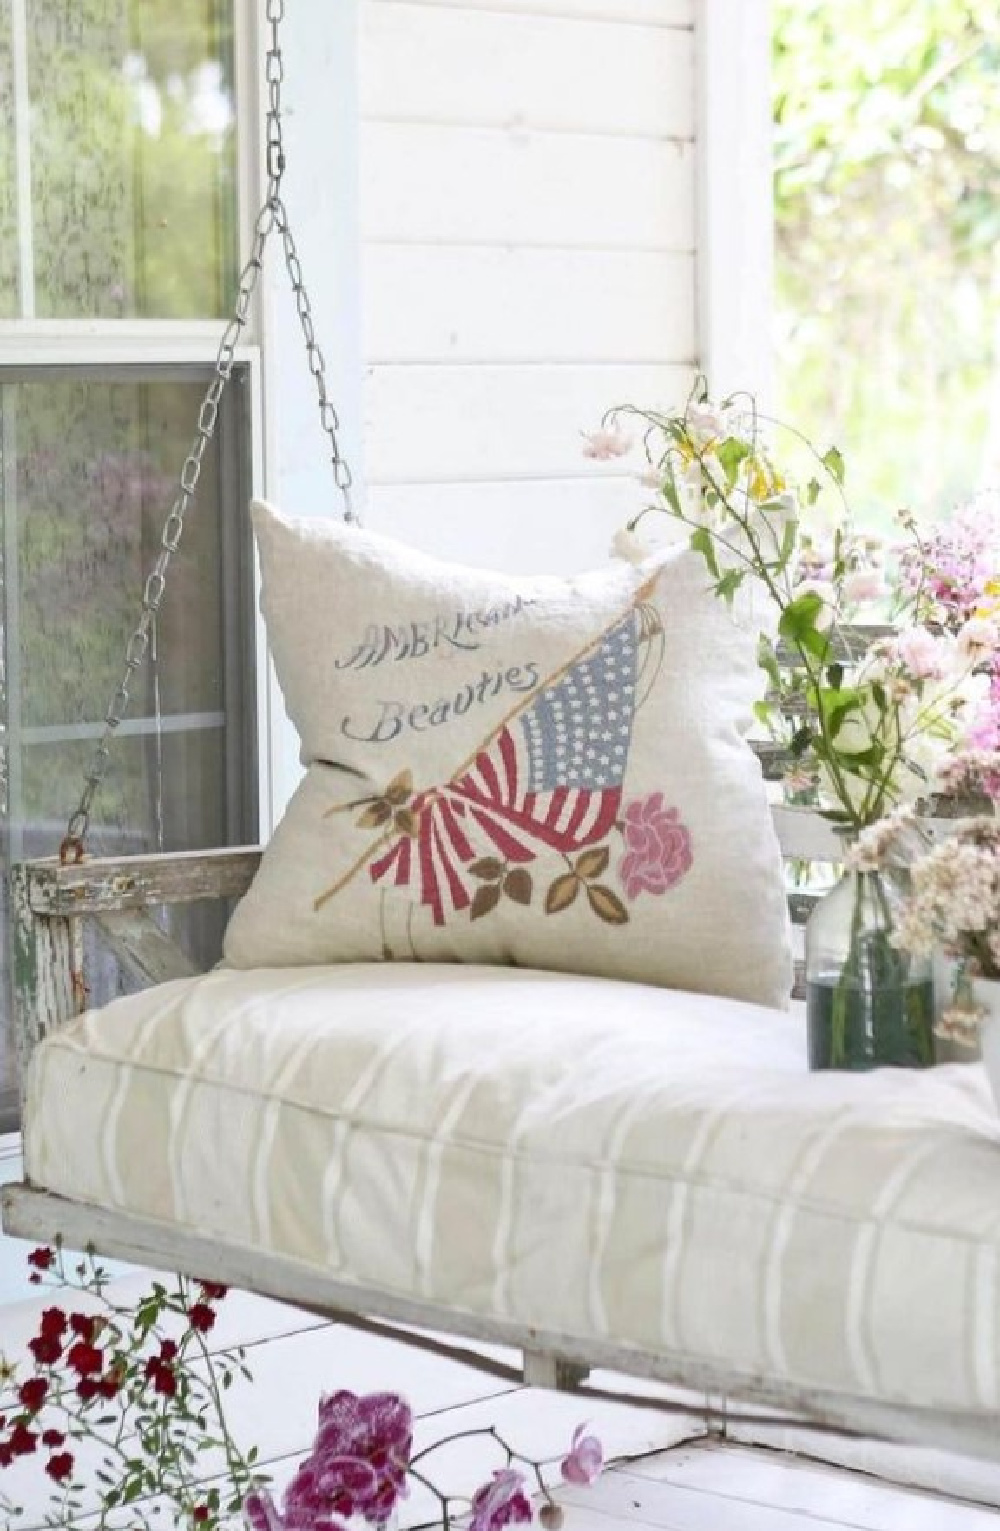 Vintage American Beauties pillow on a porch swing with a sumptuous cushion - Rachel Ashwell Shabby Chic. #porchswings #vintagepillows